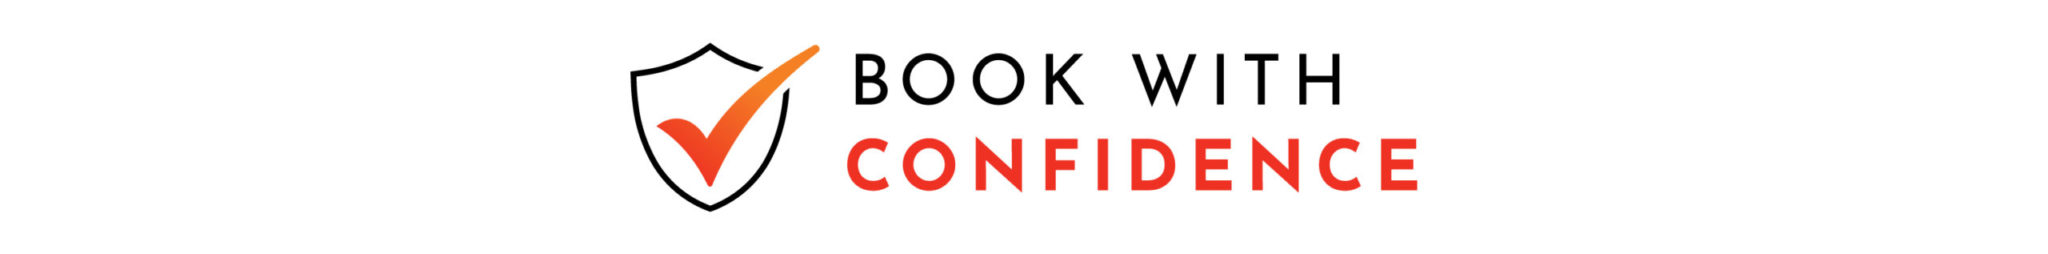 Book with Confidence-horizontal-01